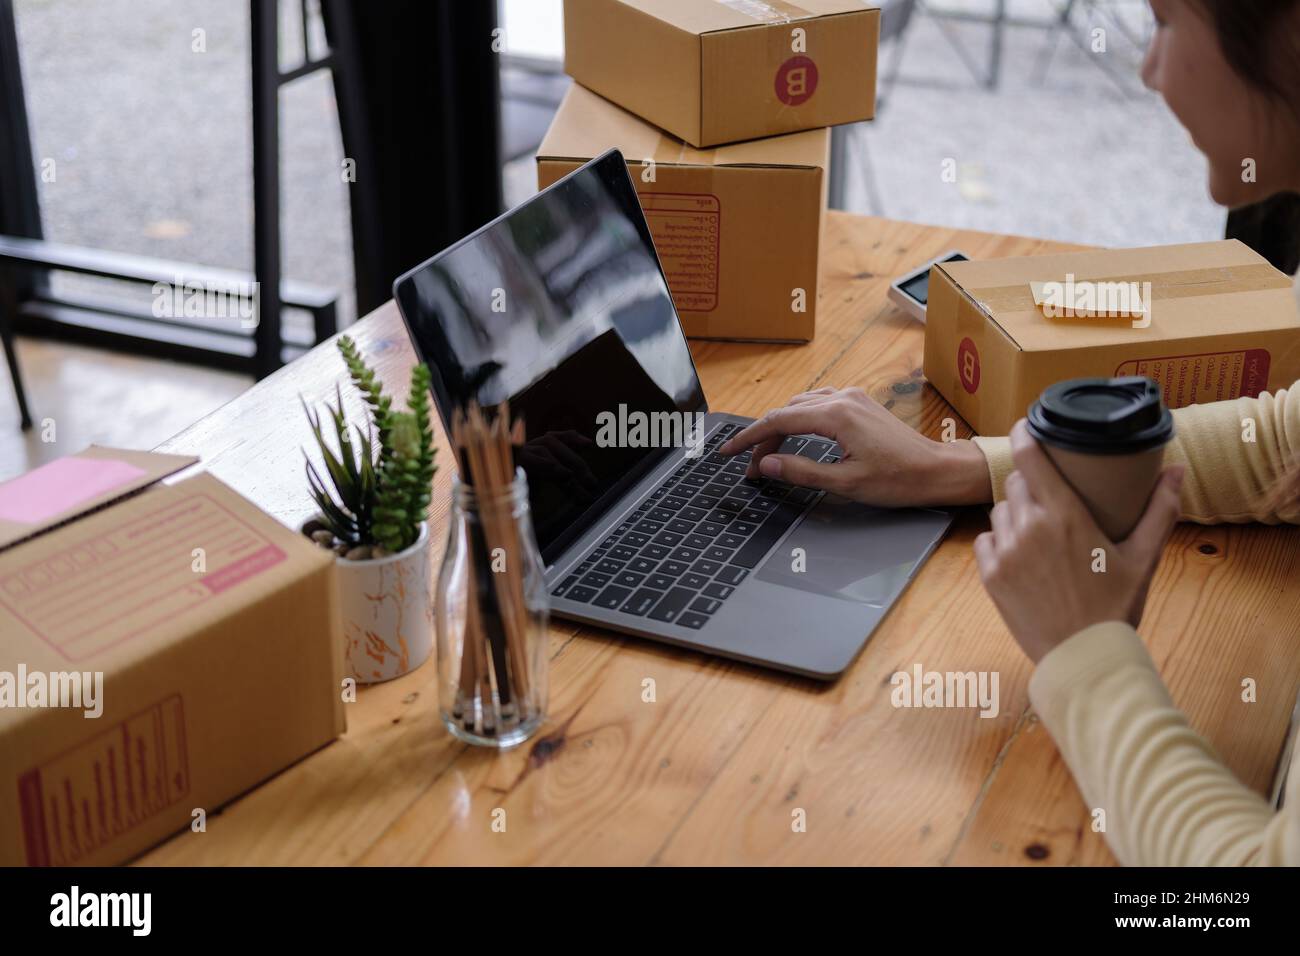 Small business aspiring entrepreneur, small and medium business freelance working in home office using computer, online marketing packaging box Stock Photo